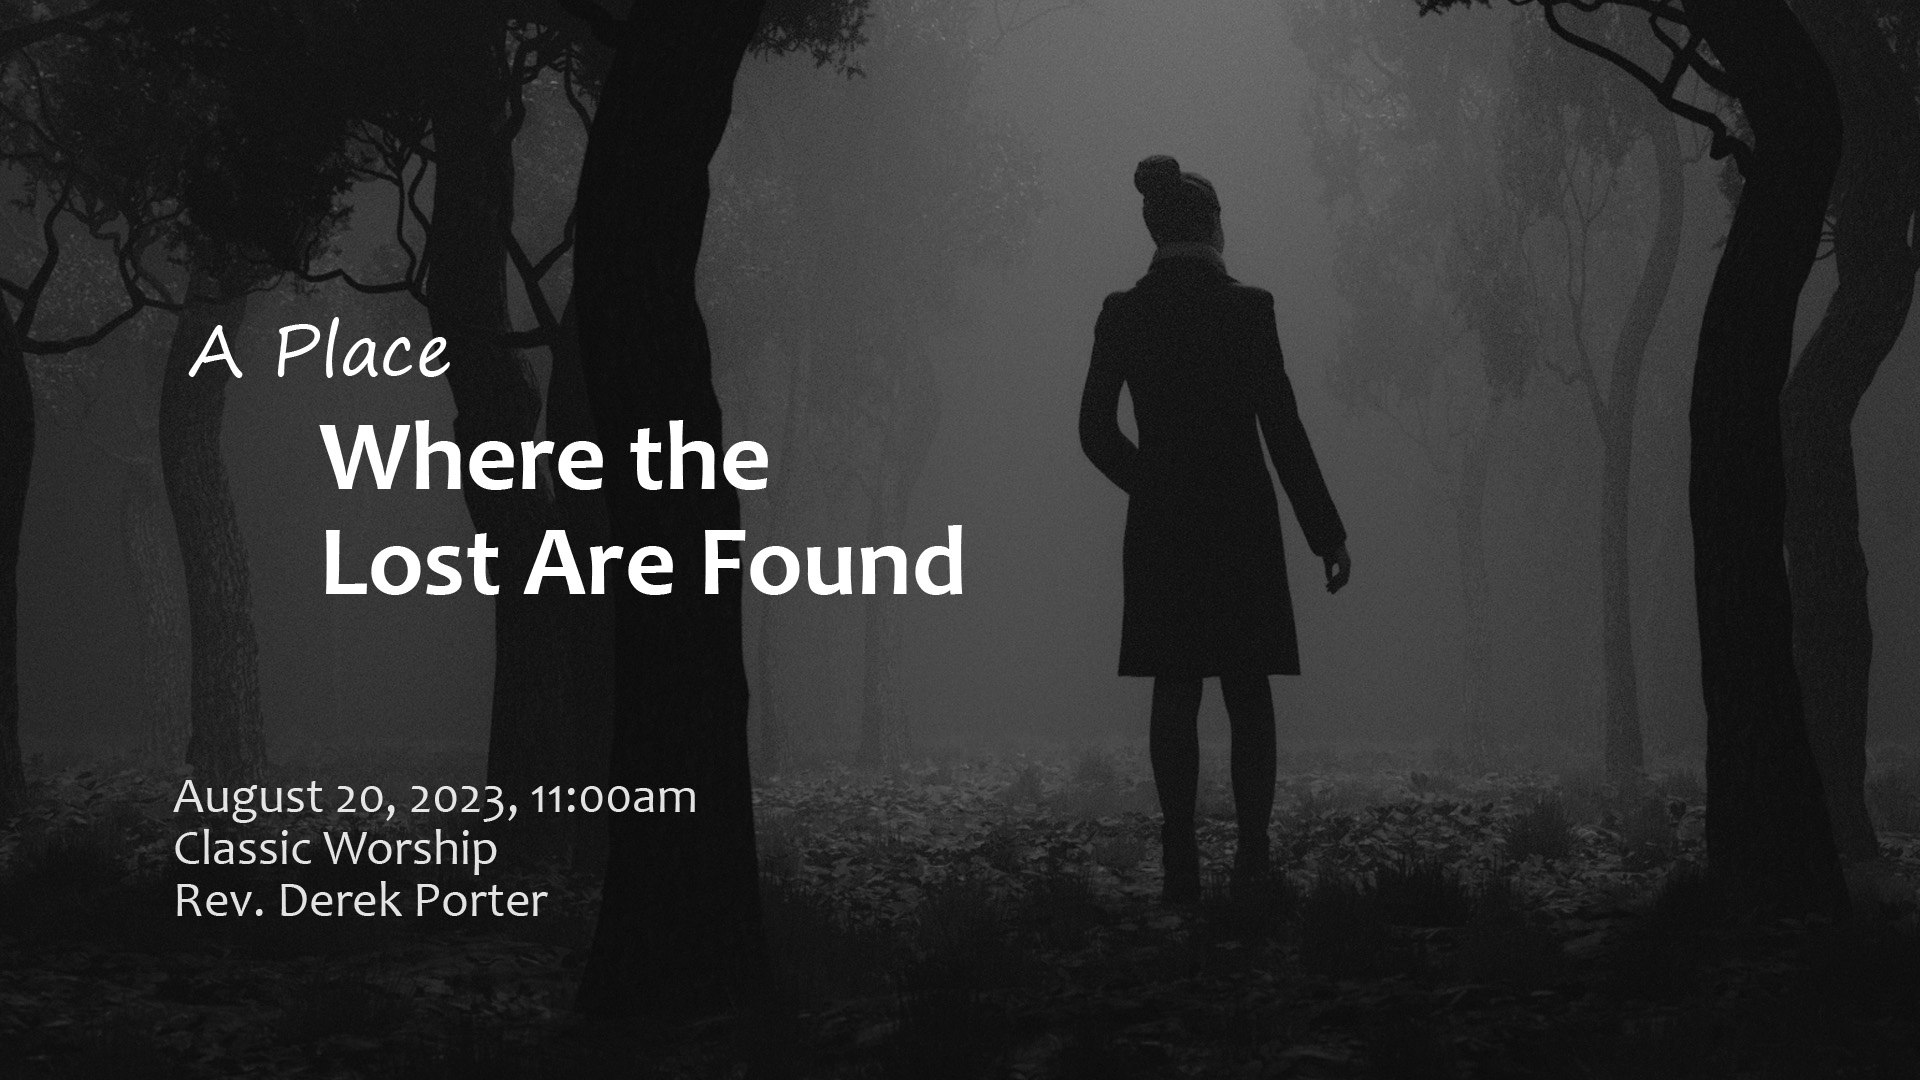 Welcome Home: A Place Where the Lost Are Found